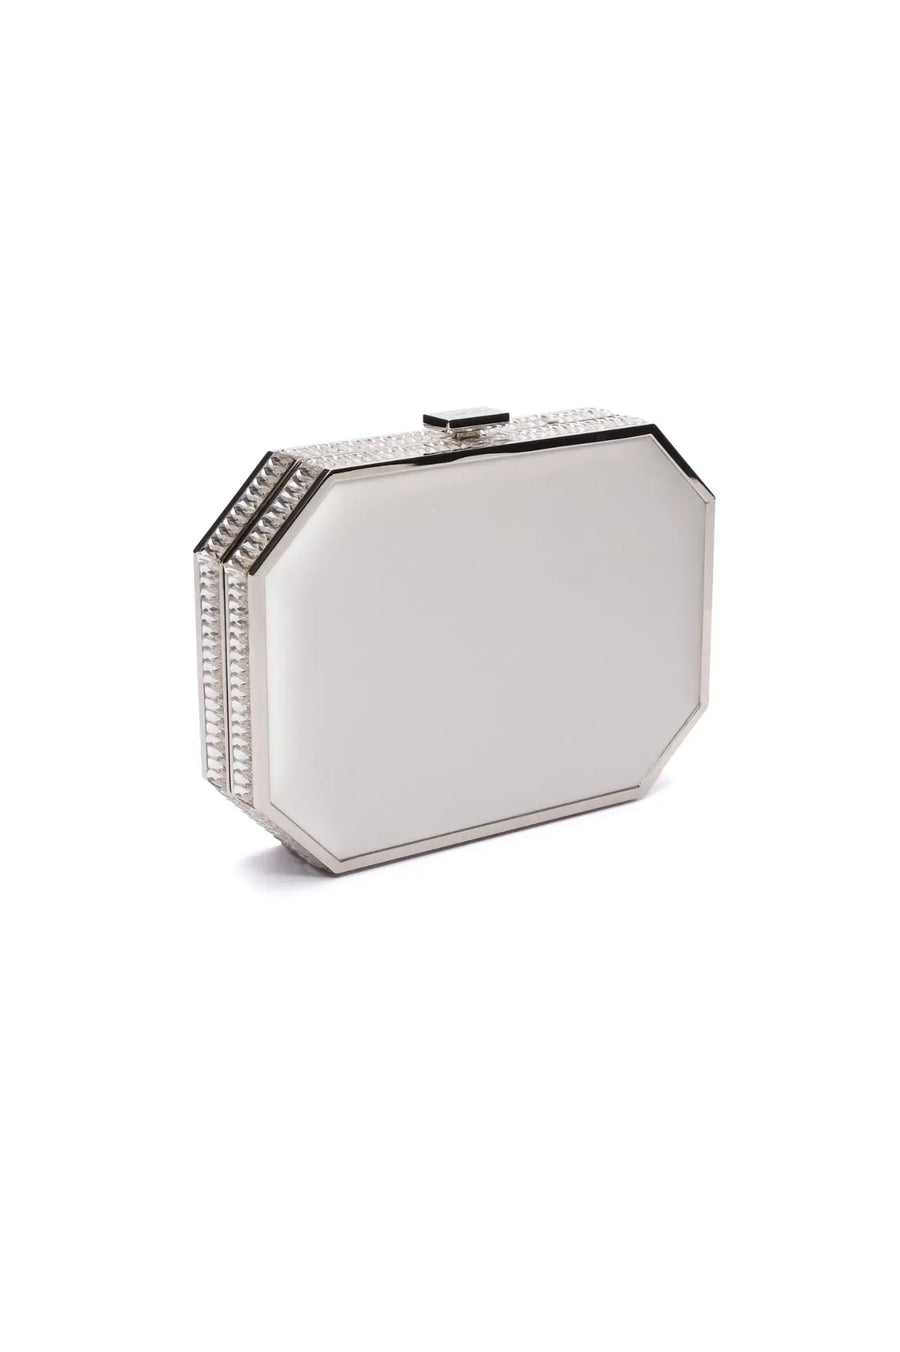 Elegant The Bella Rosa Collection Como Clutch in white satin with gemstone embellishments on a white background.